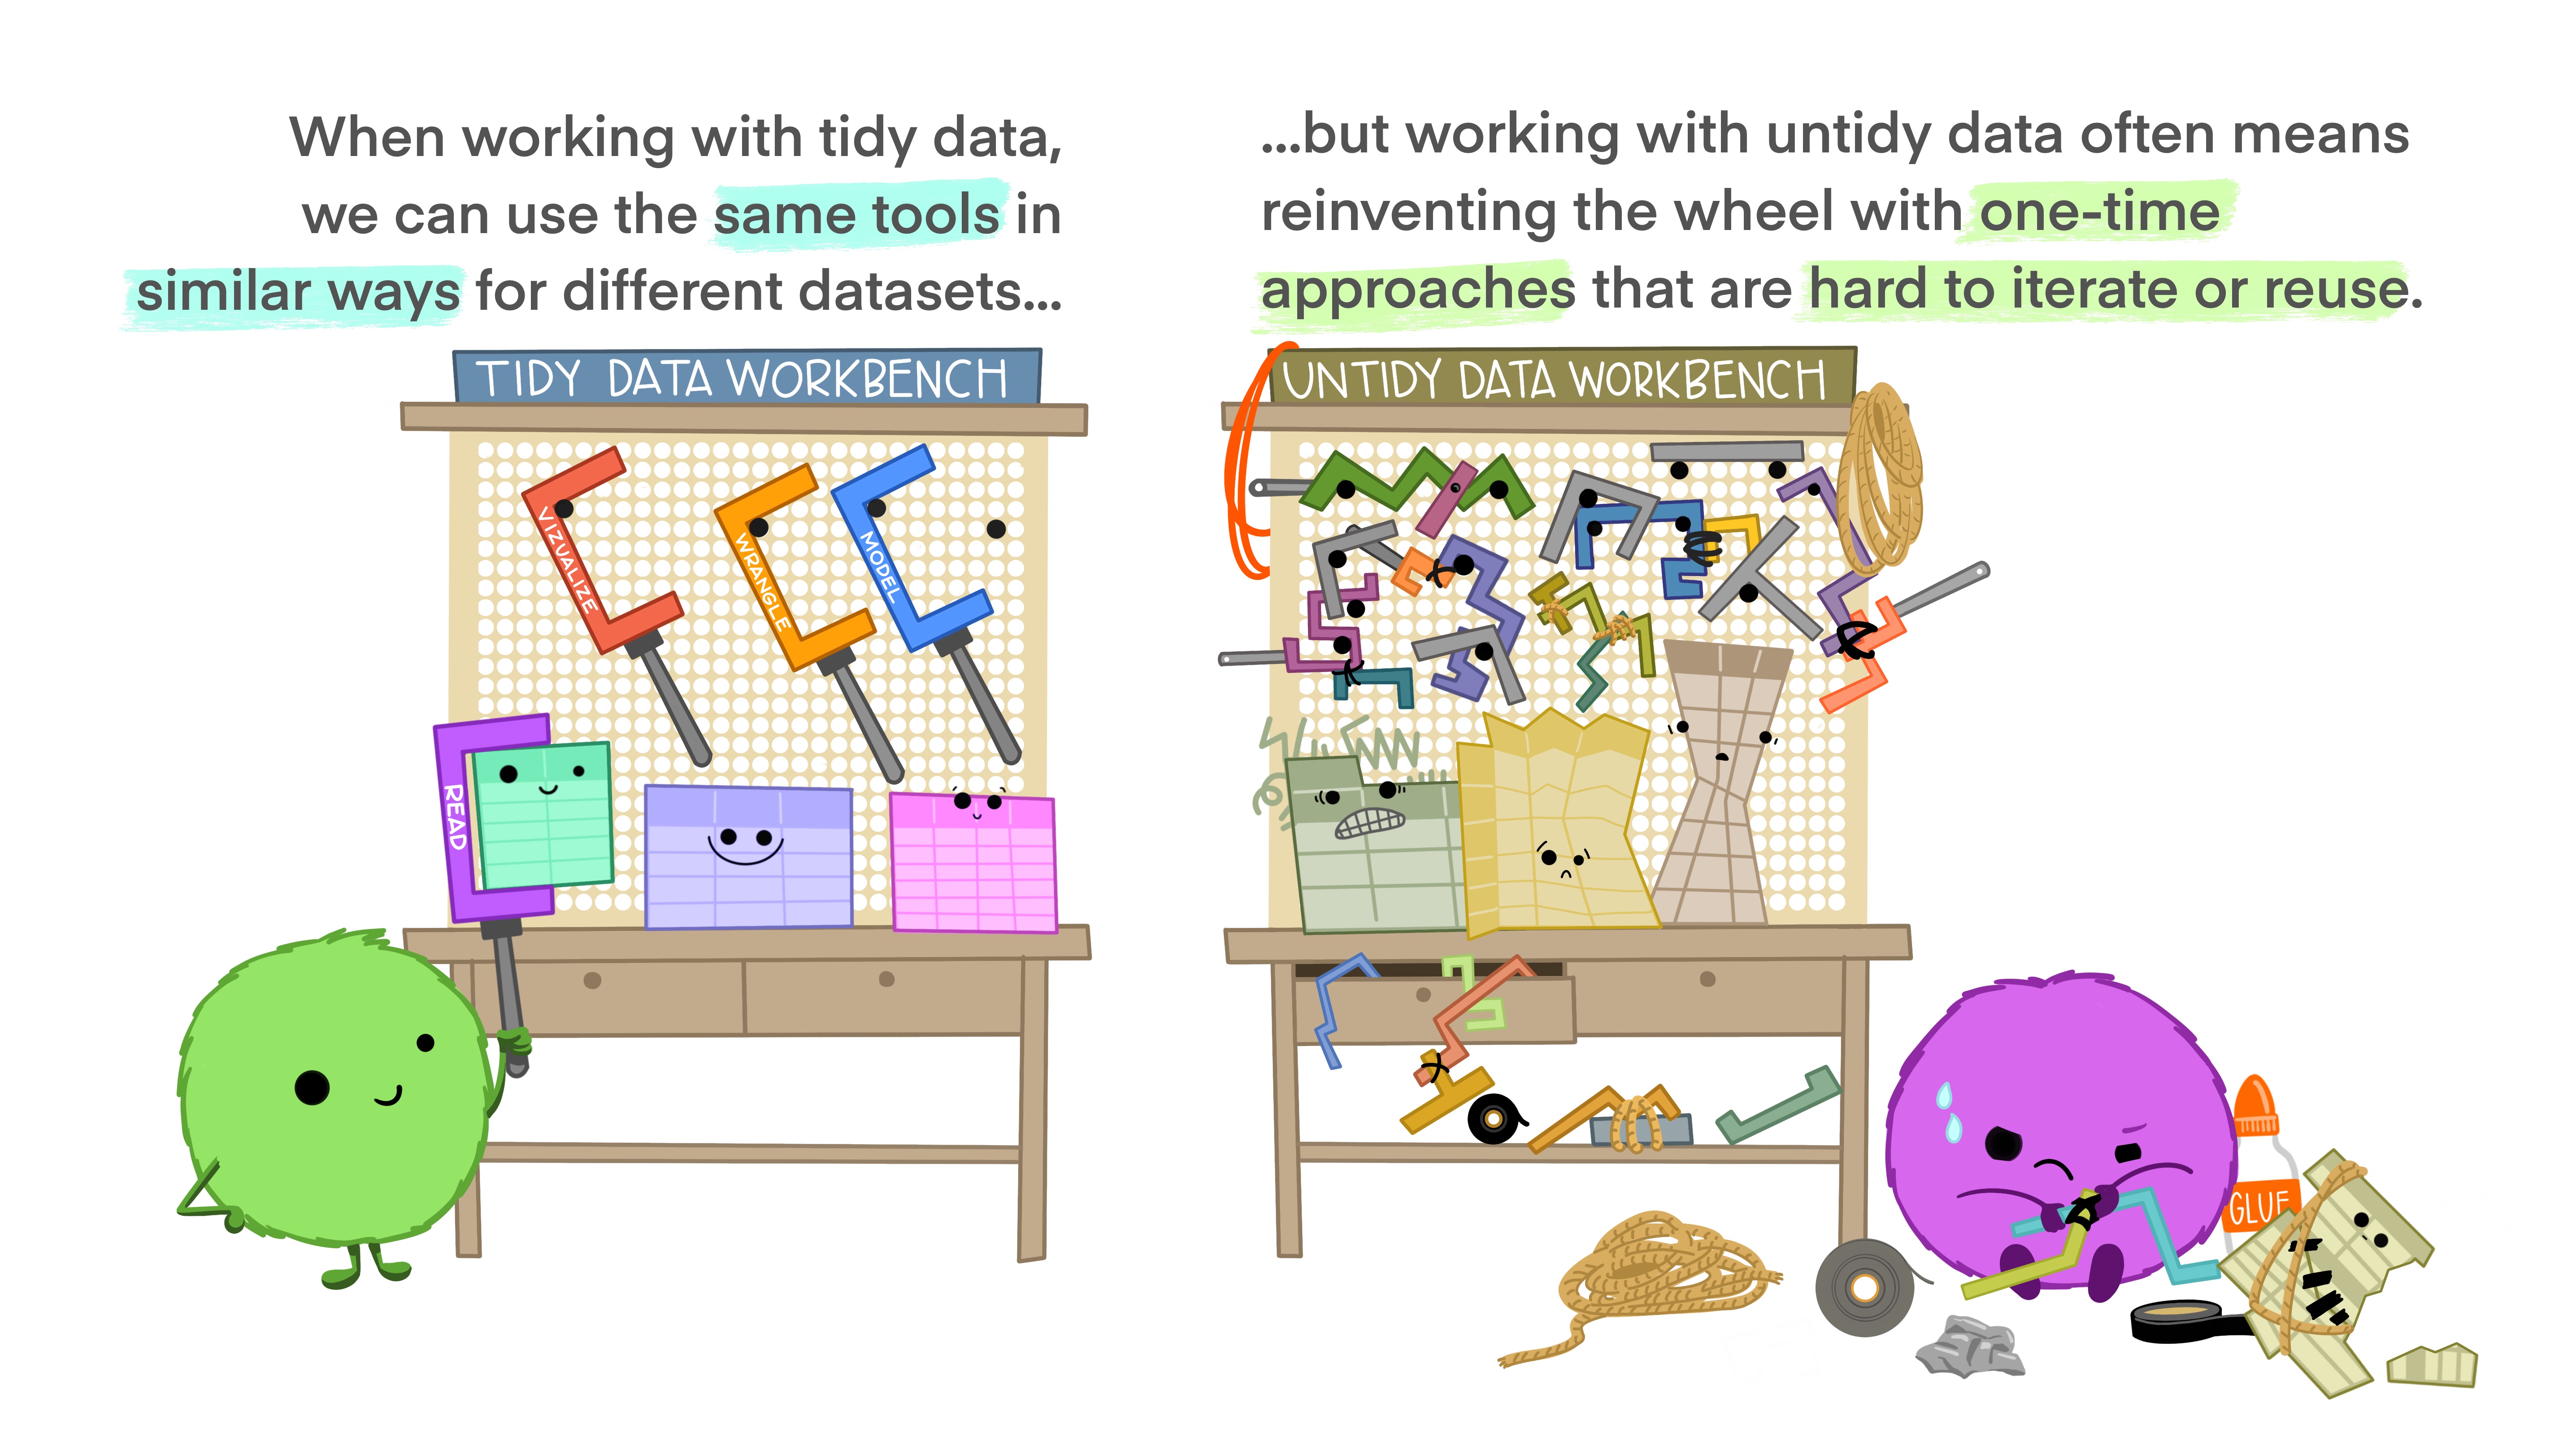 Comical cartoon comparing tools for tidy data and tools for untidy data.